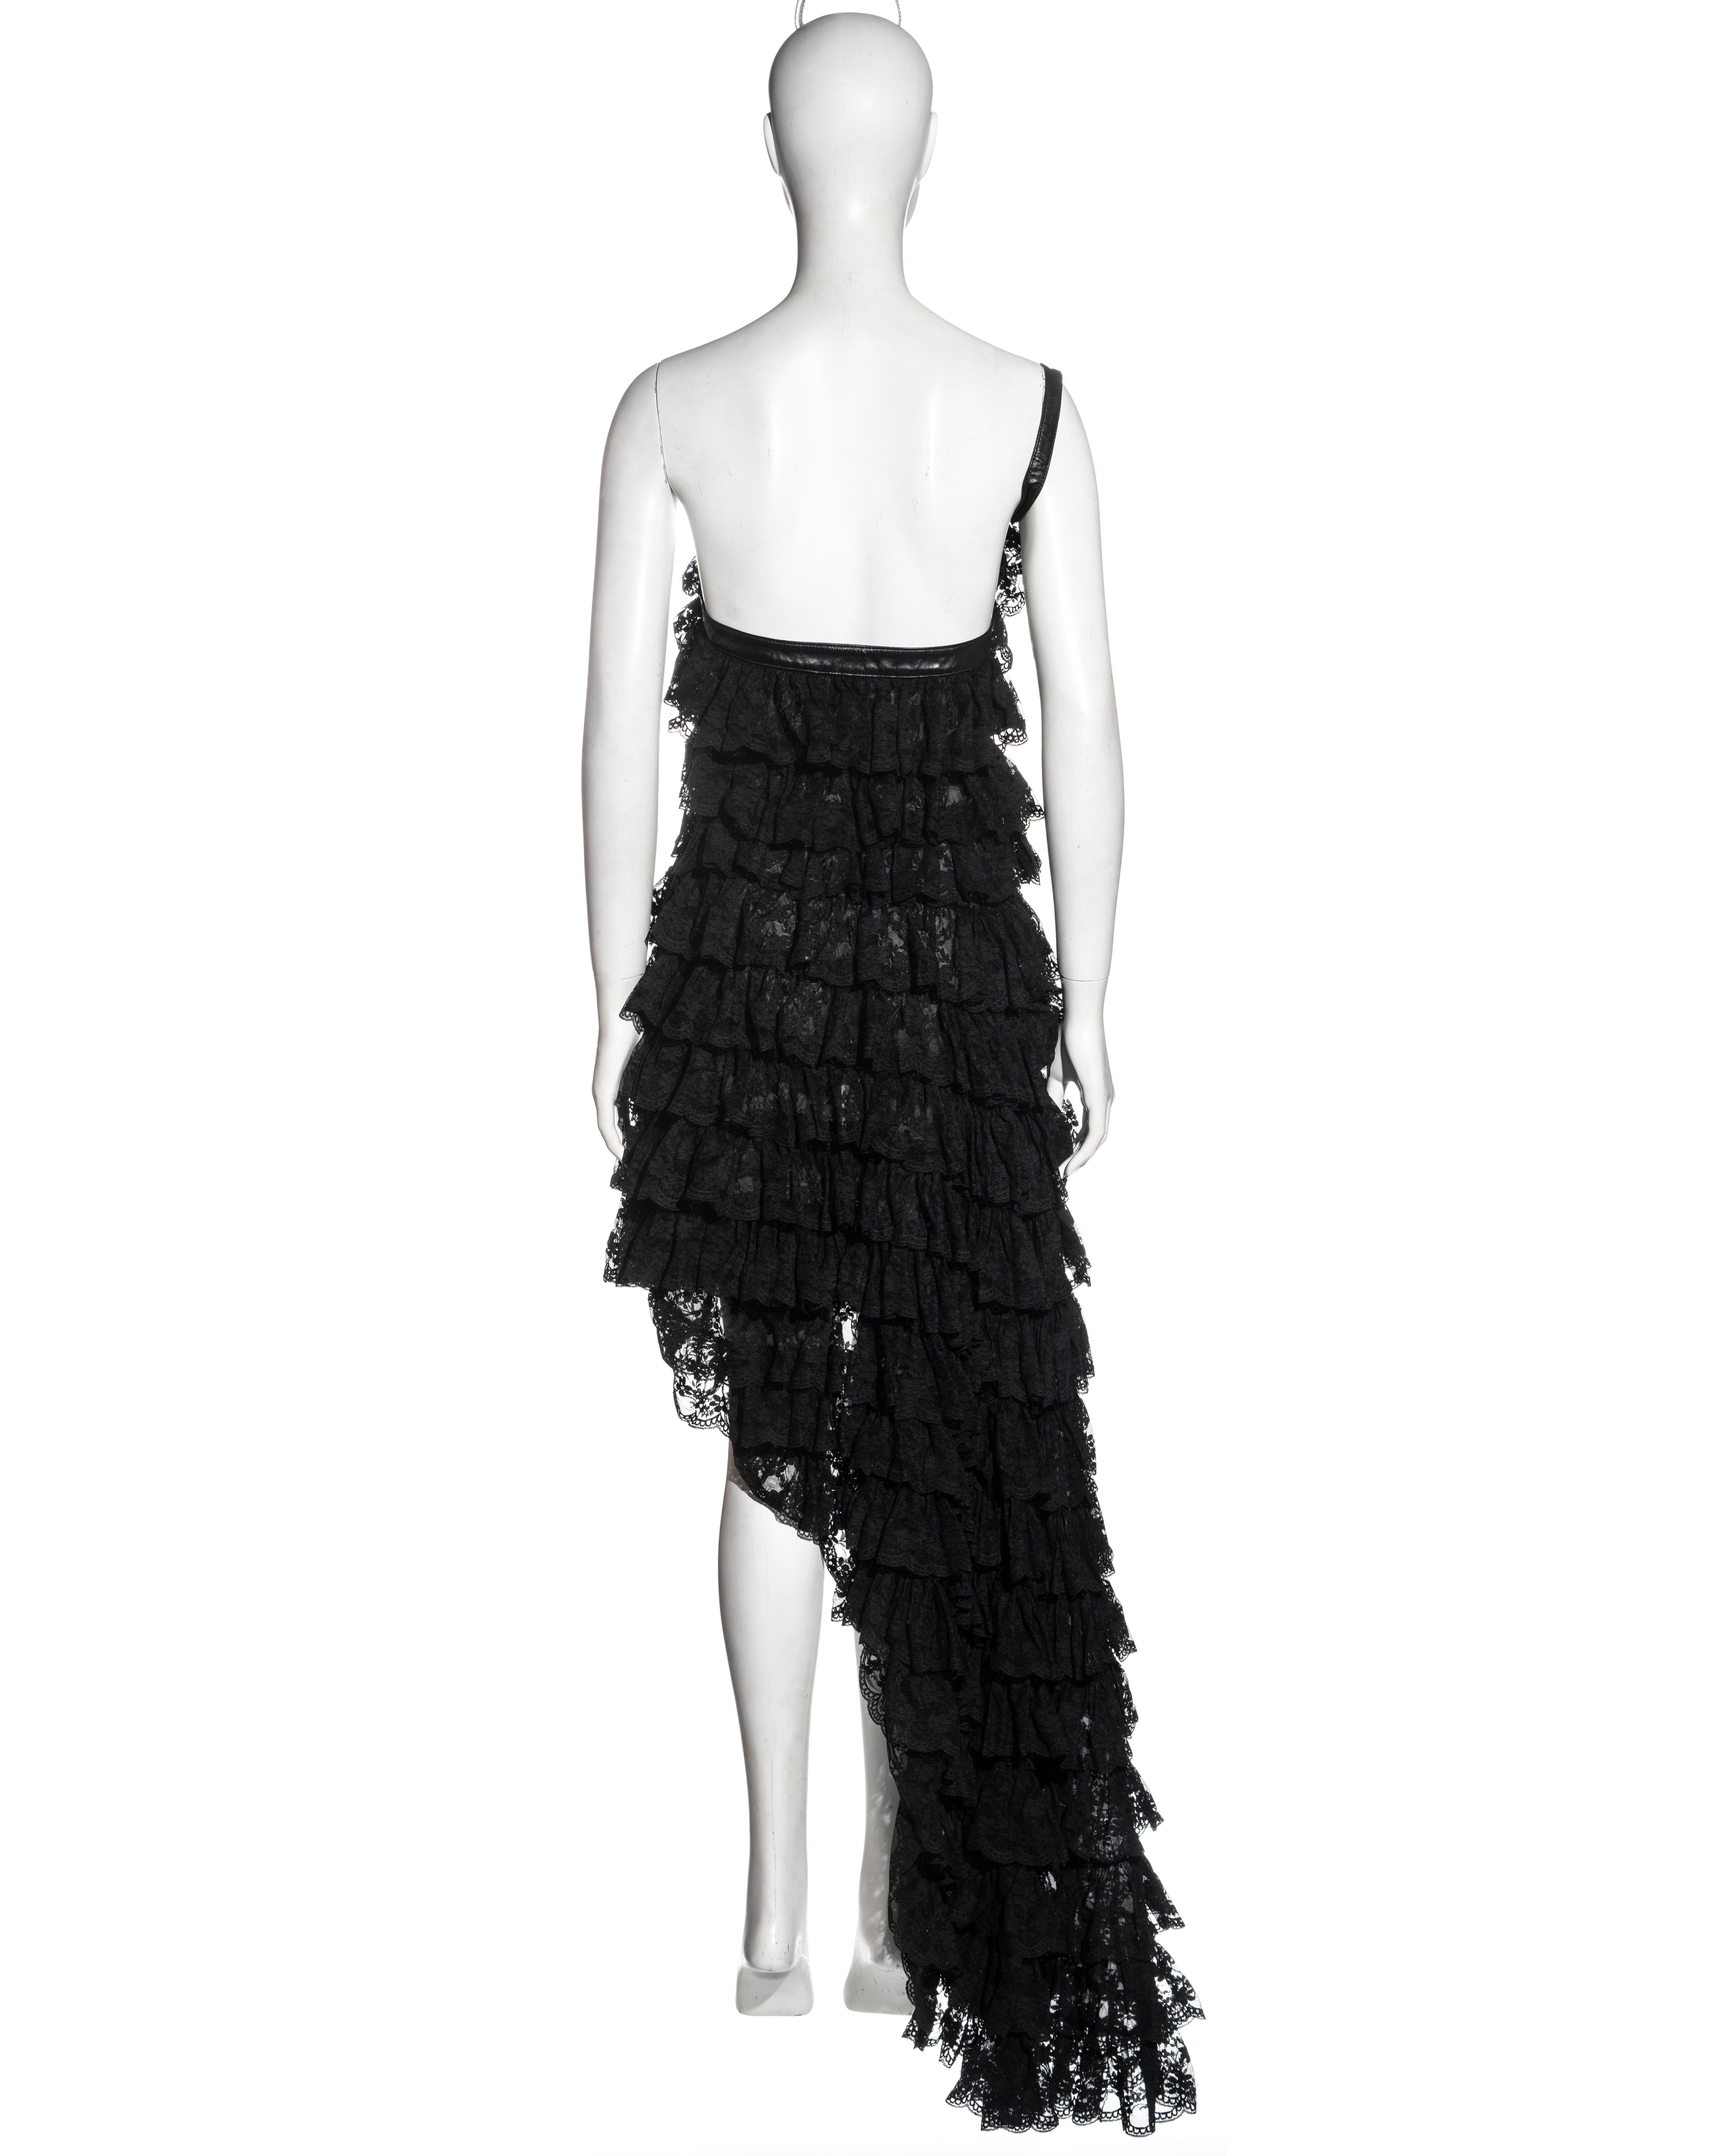 Alexander McQueen black lace and leather evening dress, ss 1999 6